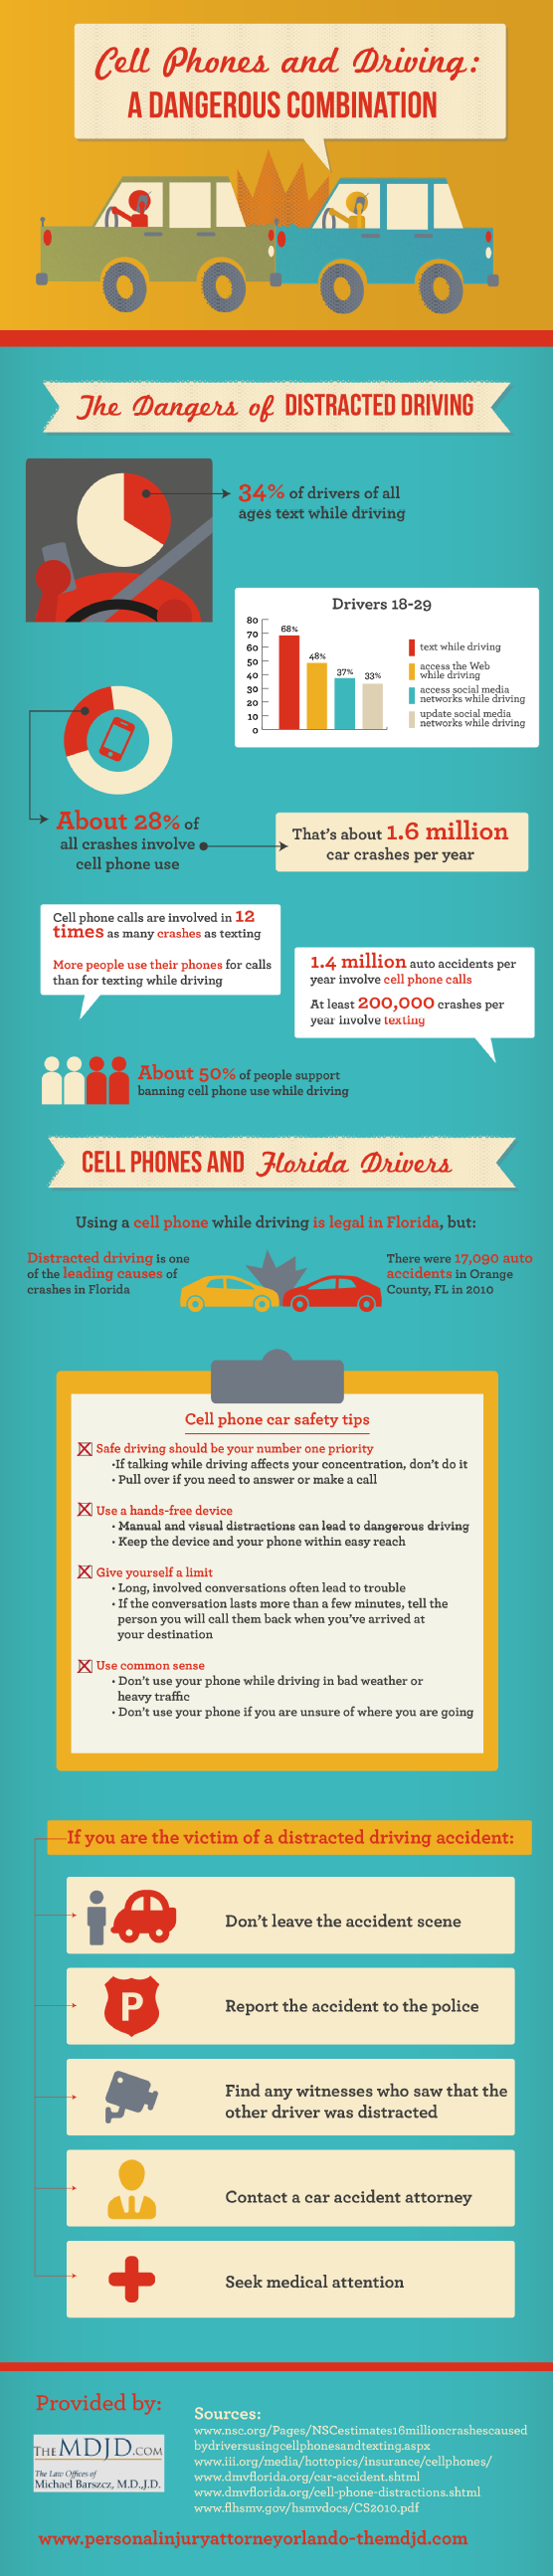 cell-phones-and-driving-a-dangerous-combination_515b5ade53c64